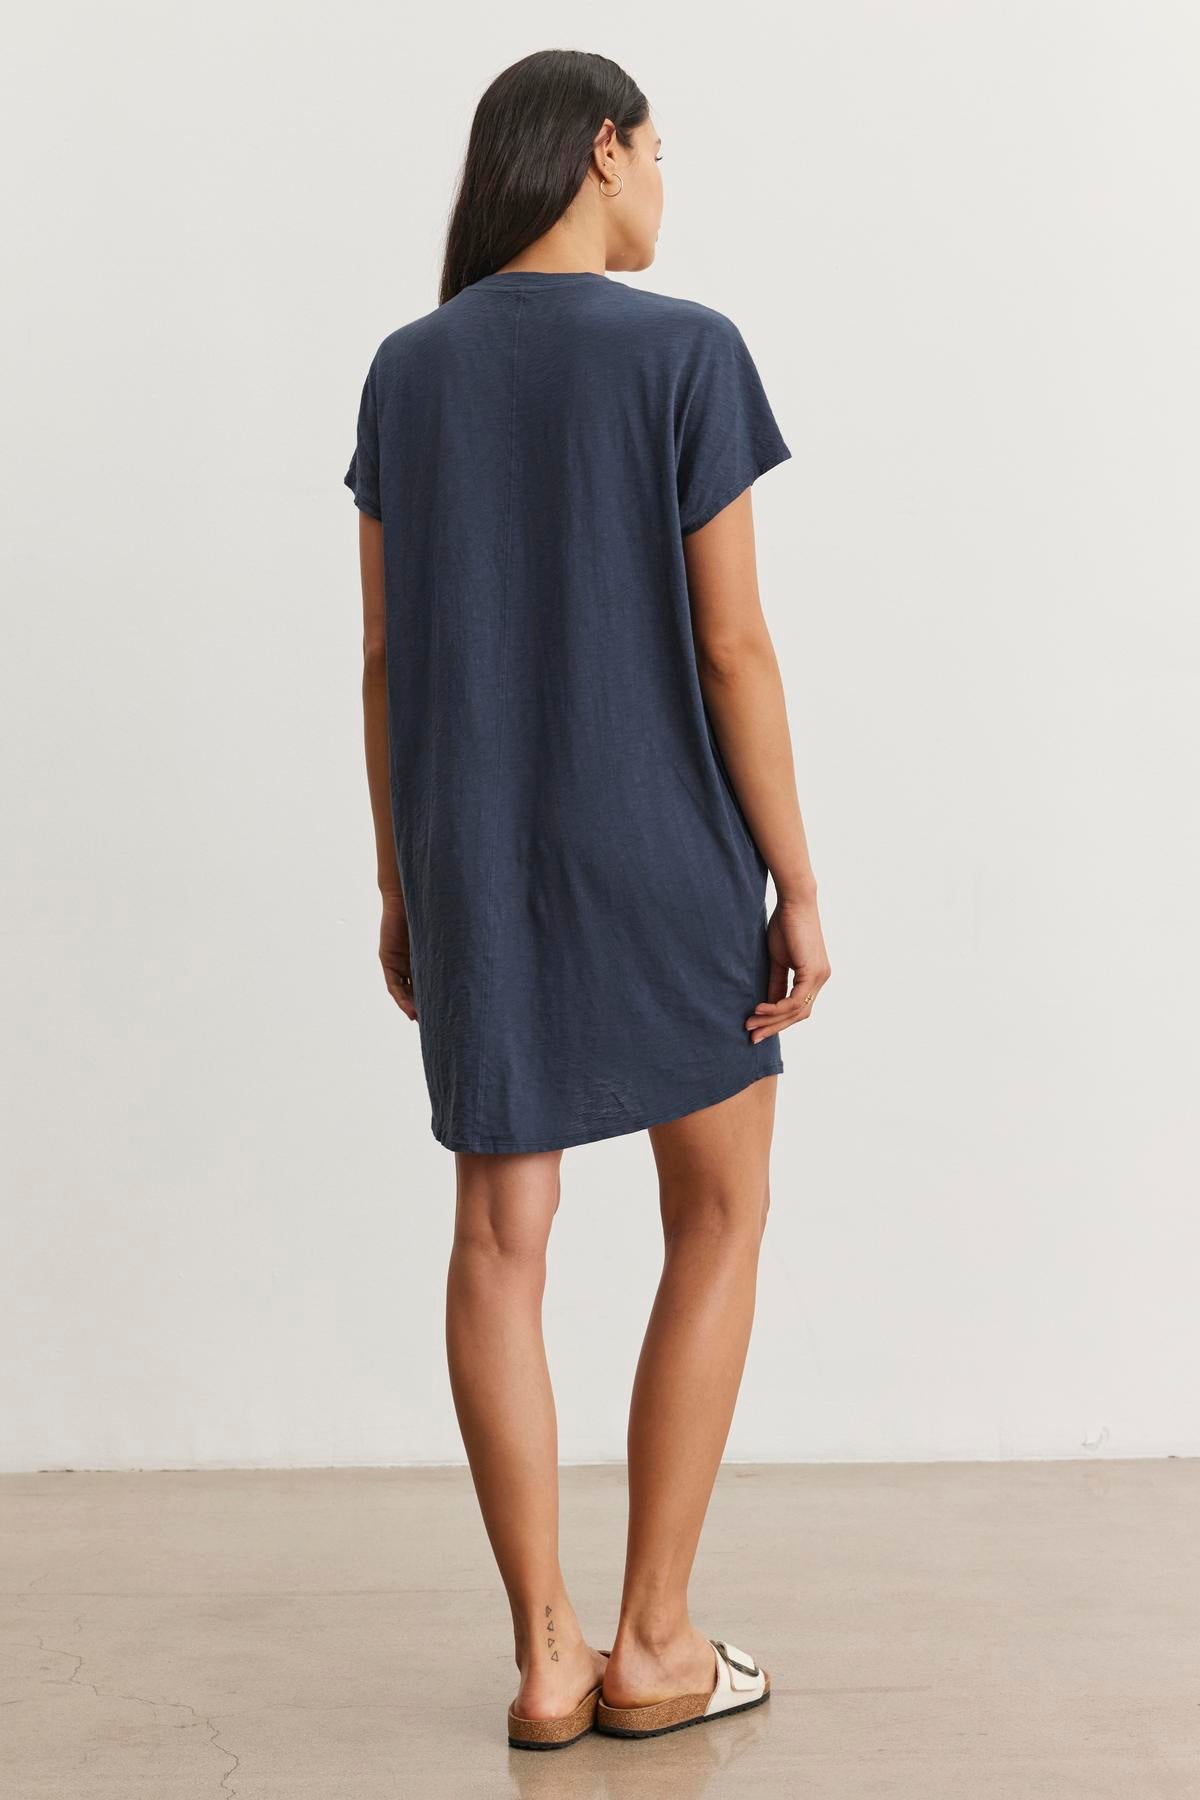 A woman stands facing away from the camera, wearing the ATHENA DRESS by Velvet by Graham & Spencer, a relaxed fit dark blue t-shirt dress made of cotton slub fabric, and white sandals.-37606520291521